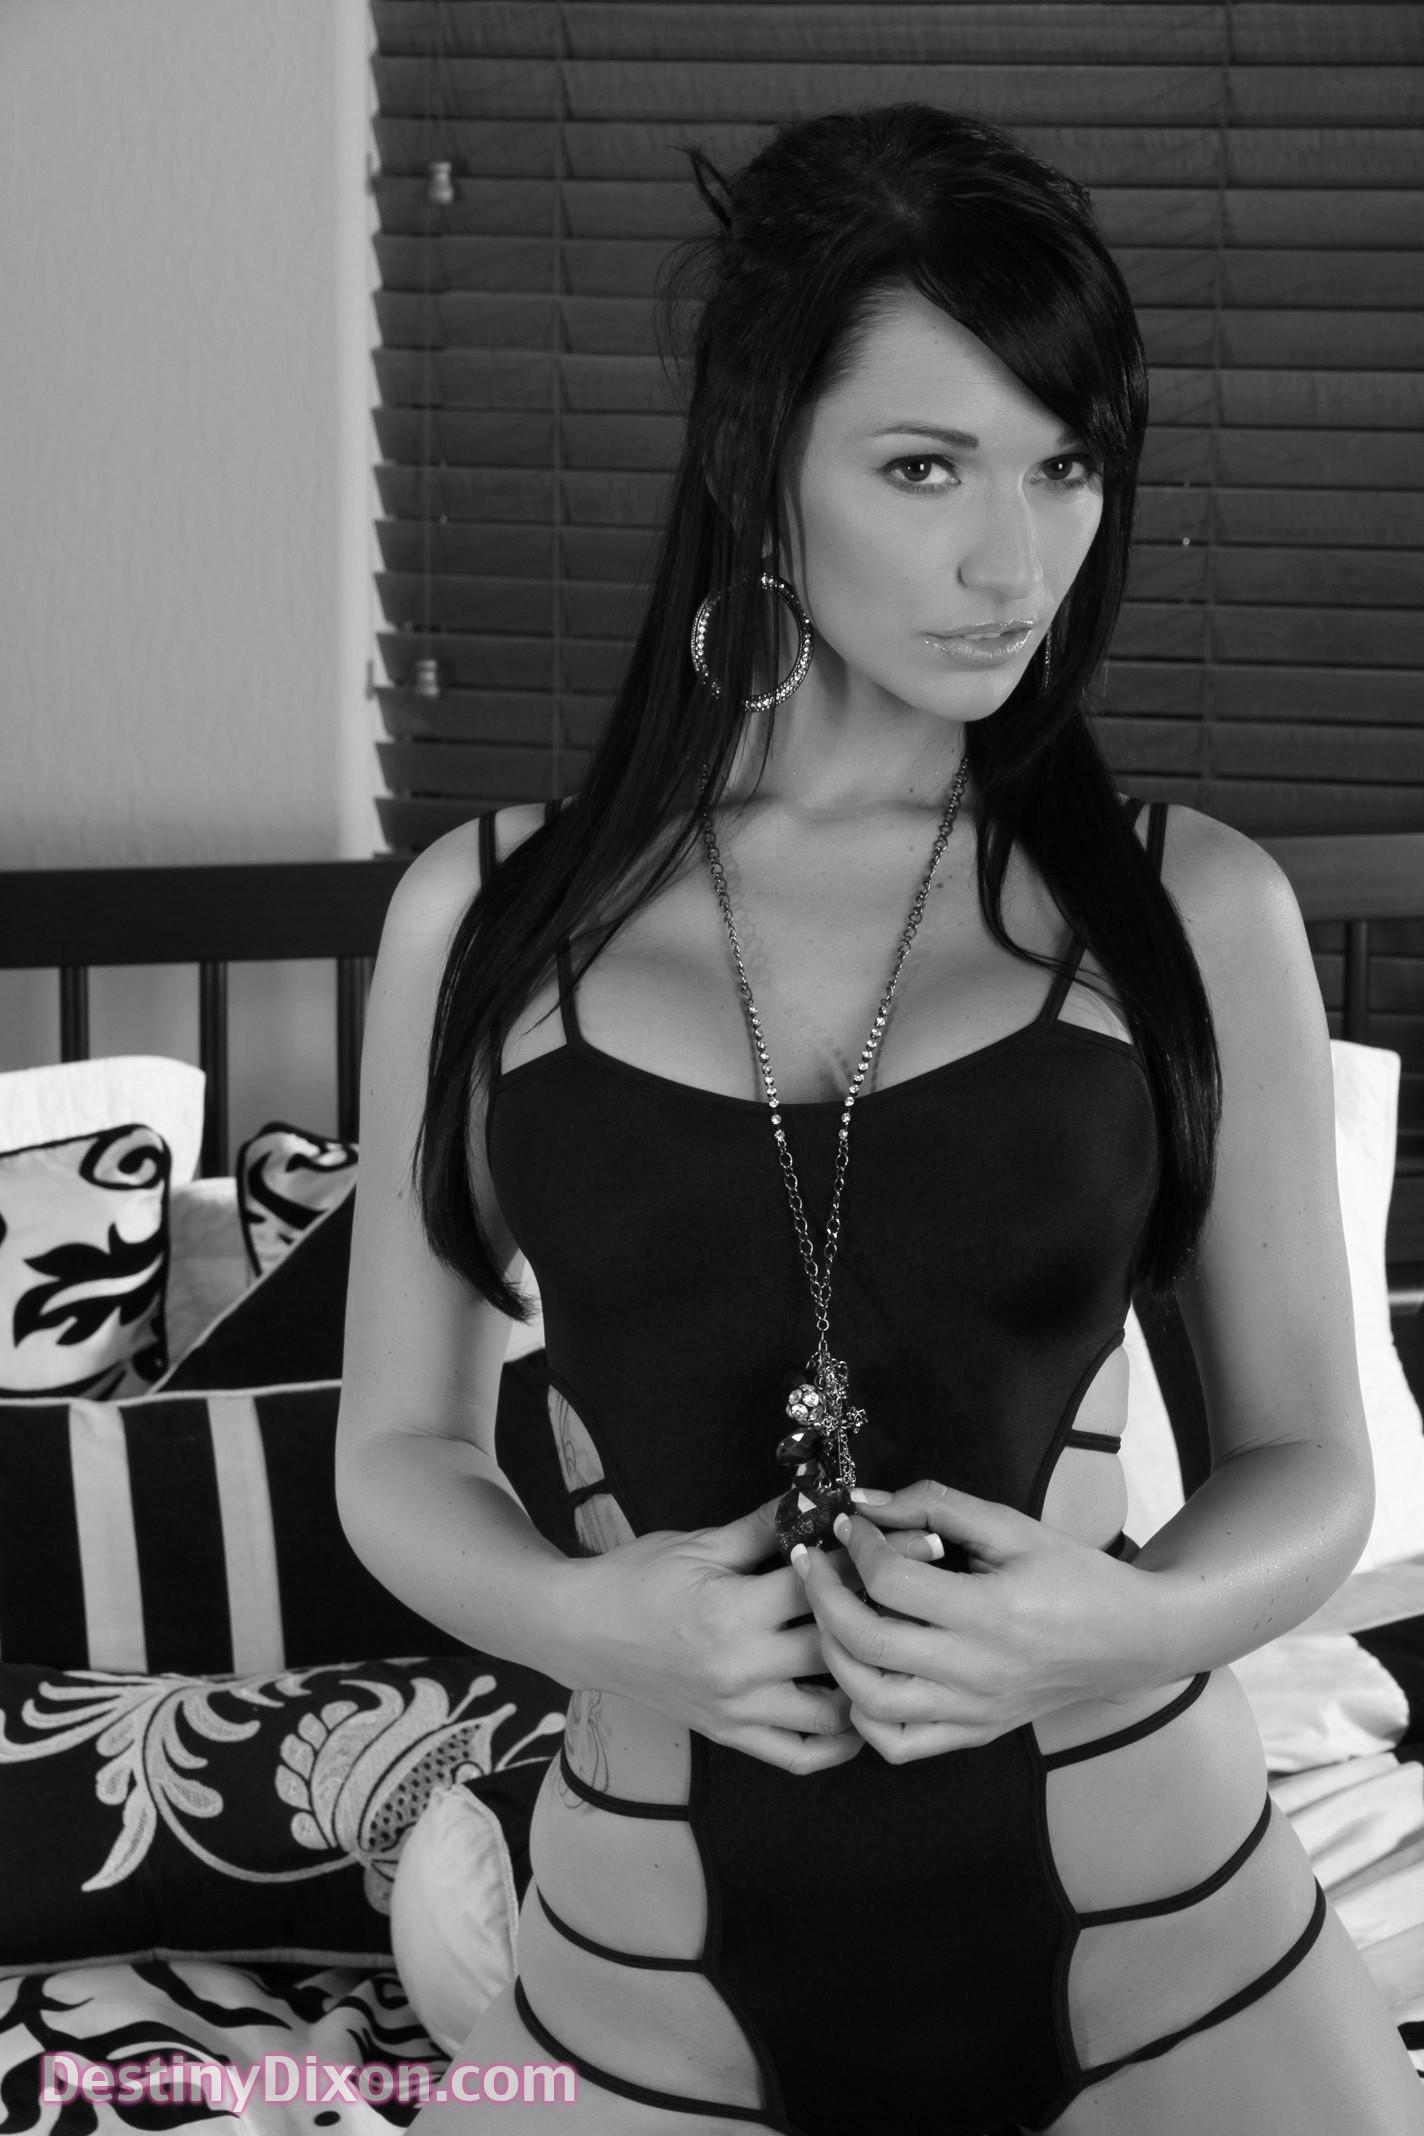 Black and white pictures of Destiny Dixon playing with her pussy in boots #54030984